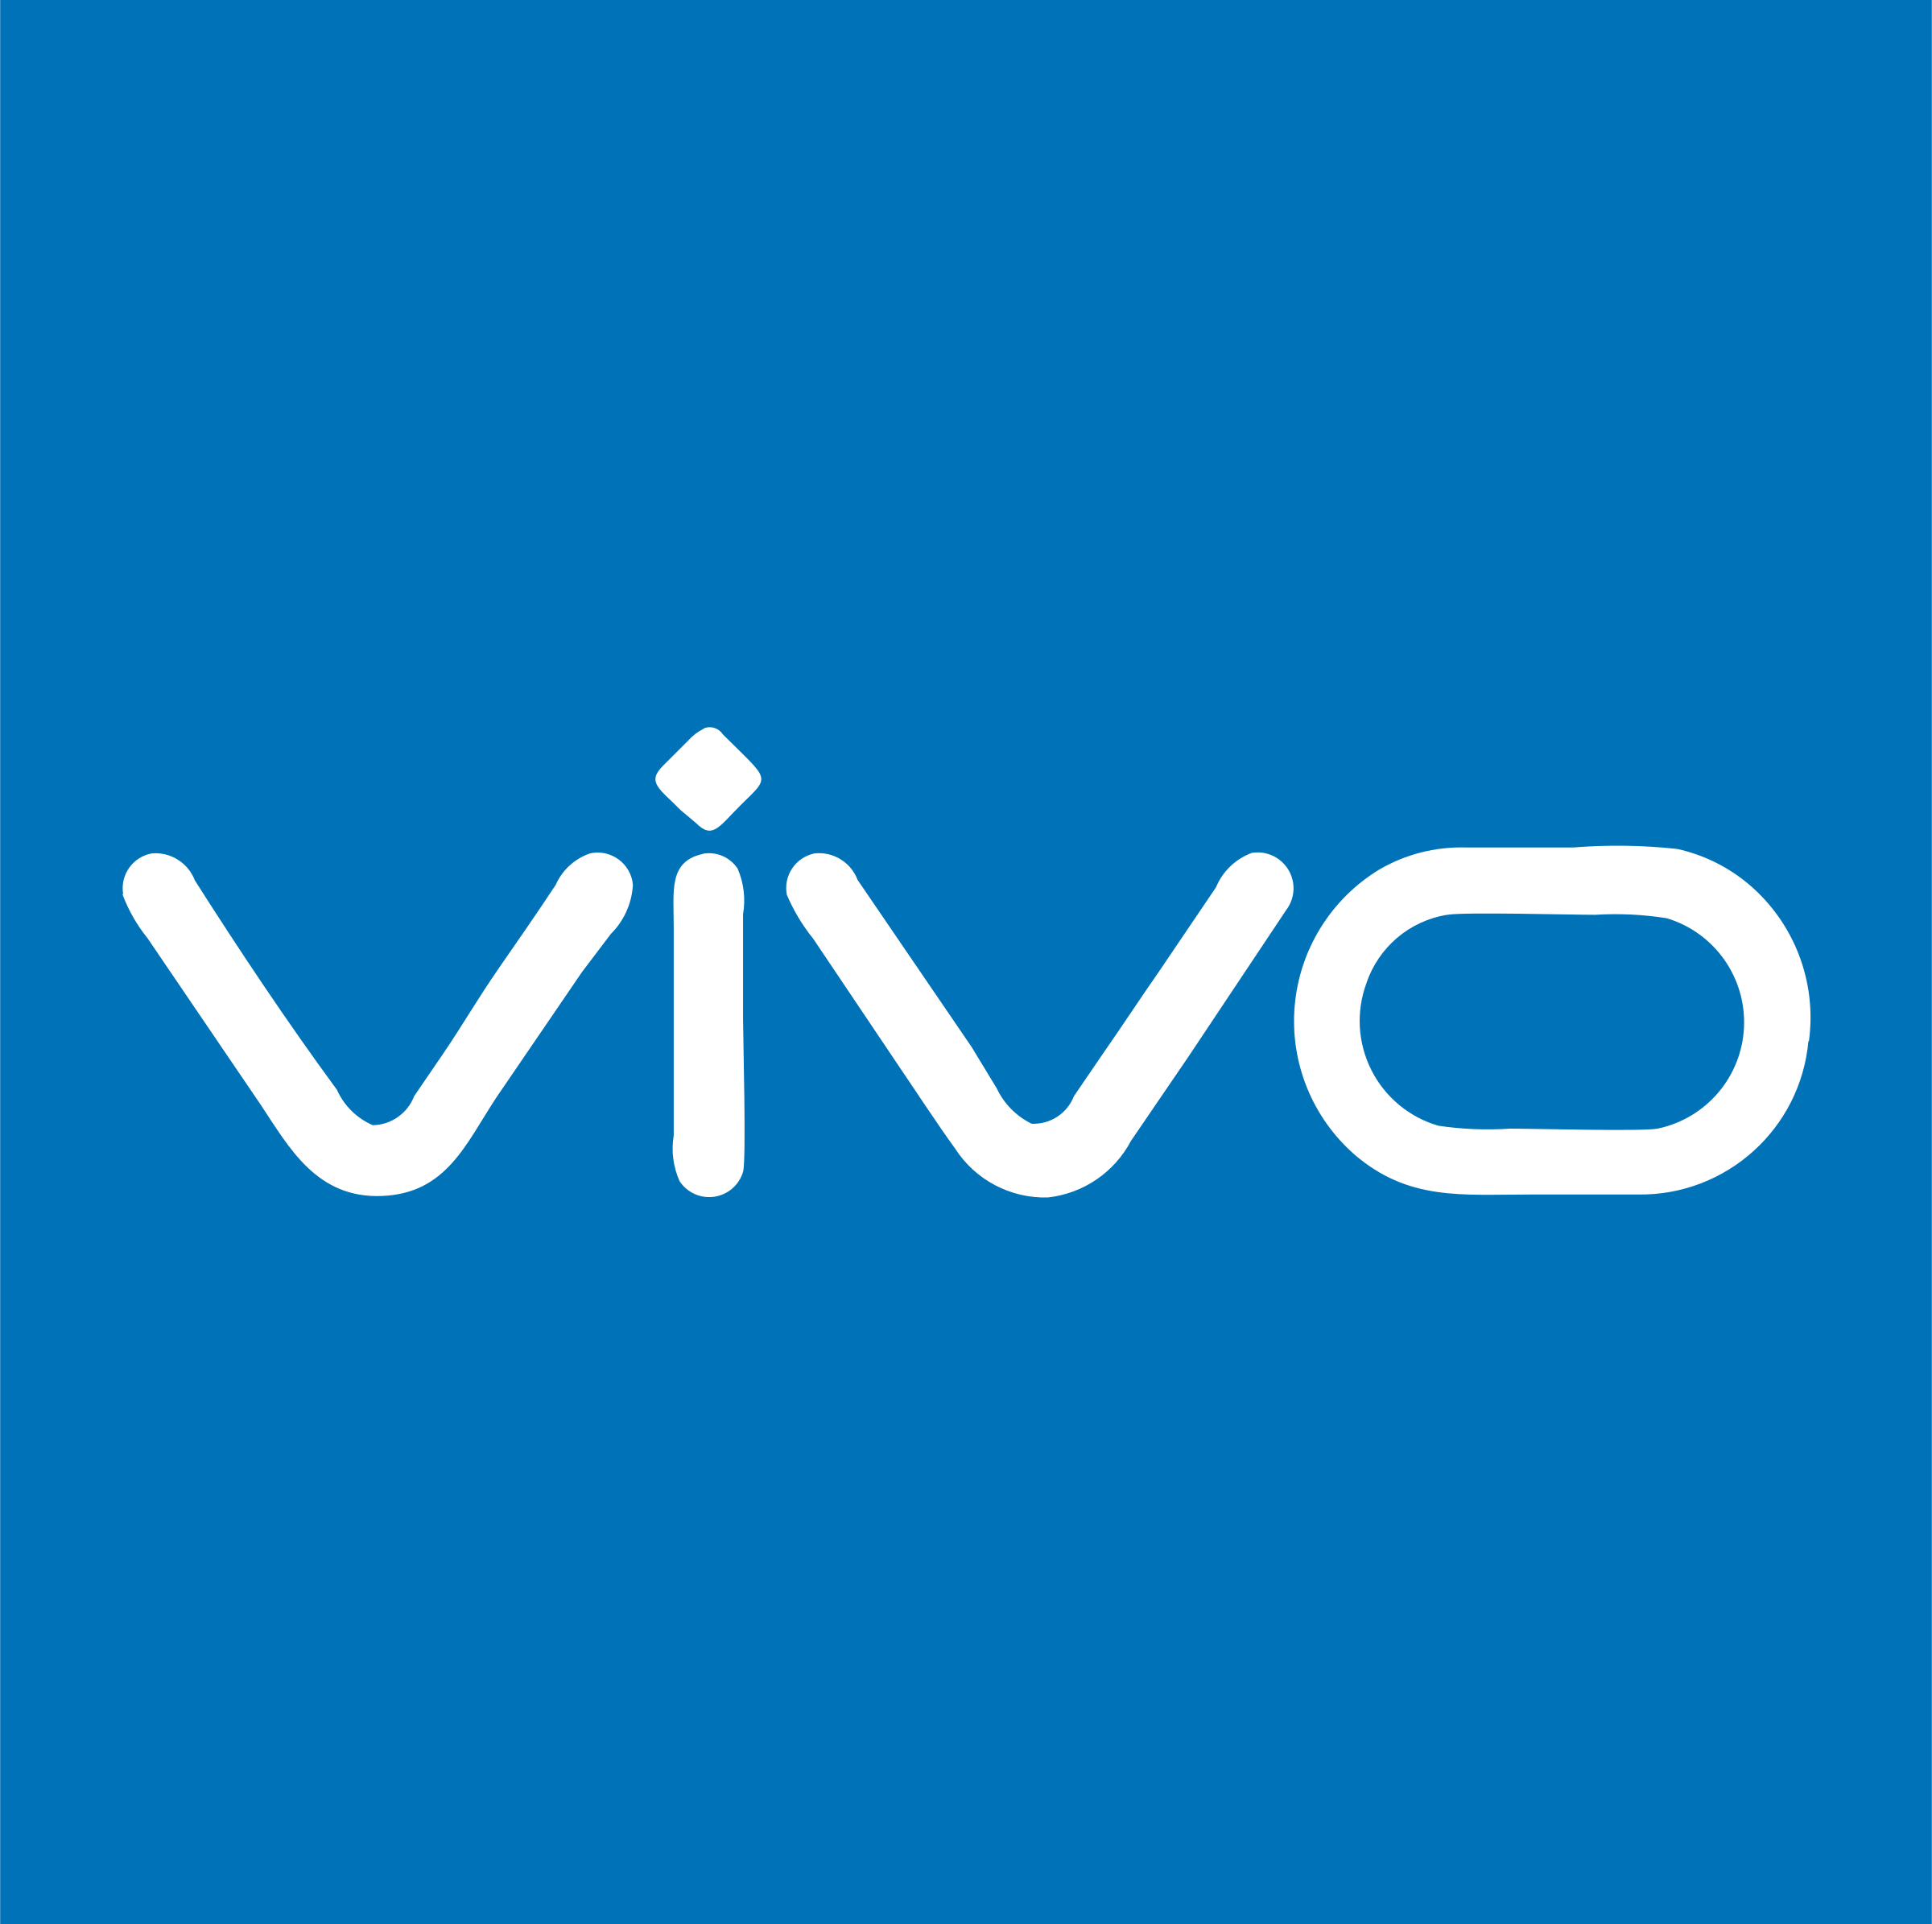 Vivo Announces Expansion Plan into Middle East and Africa Markets